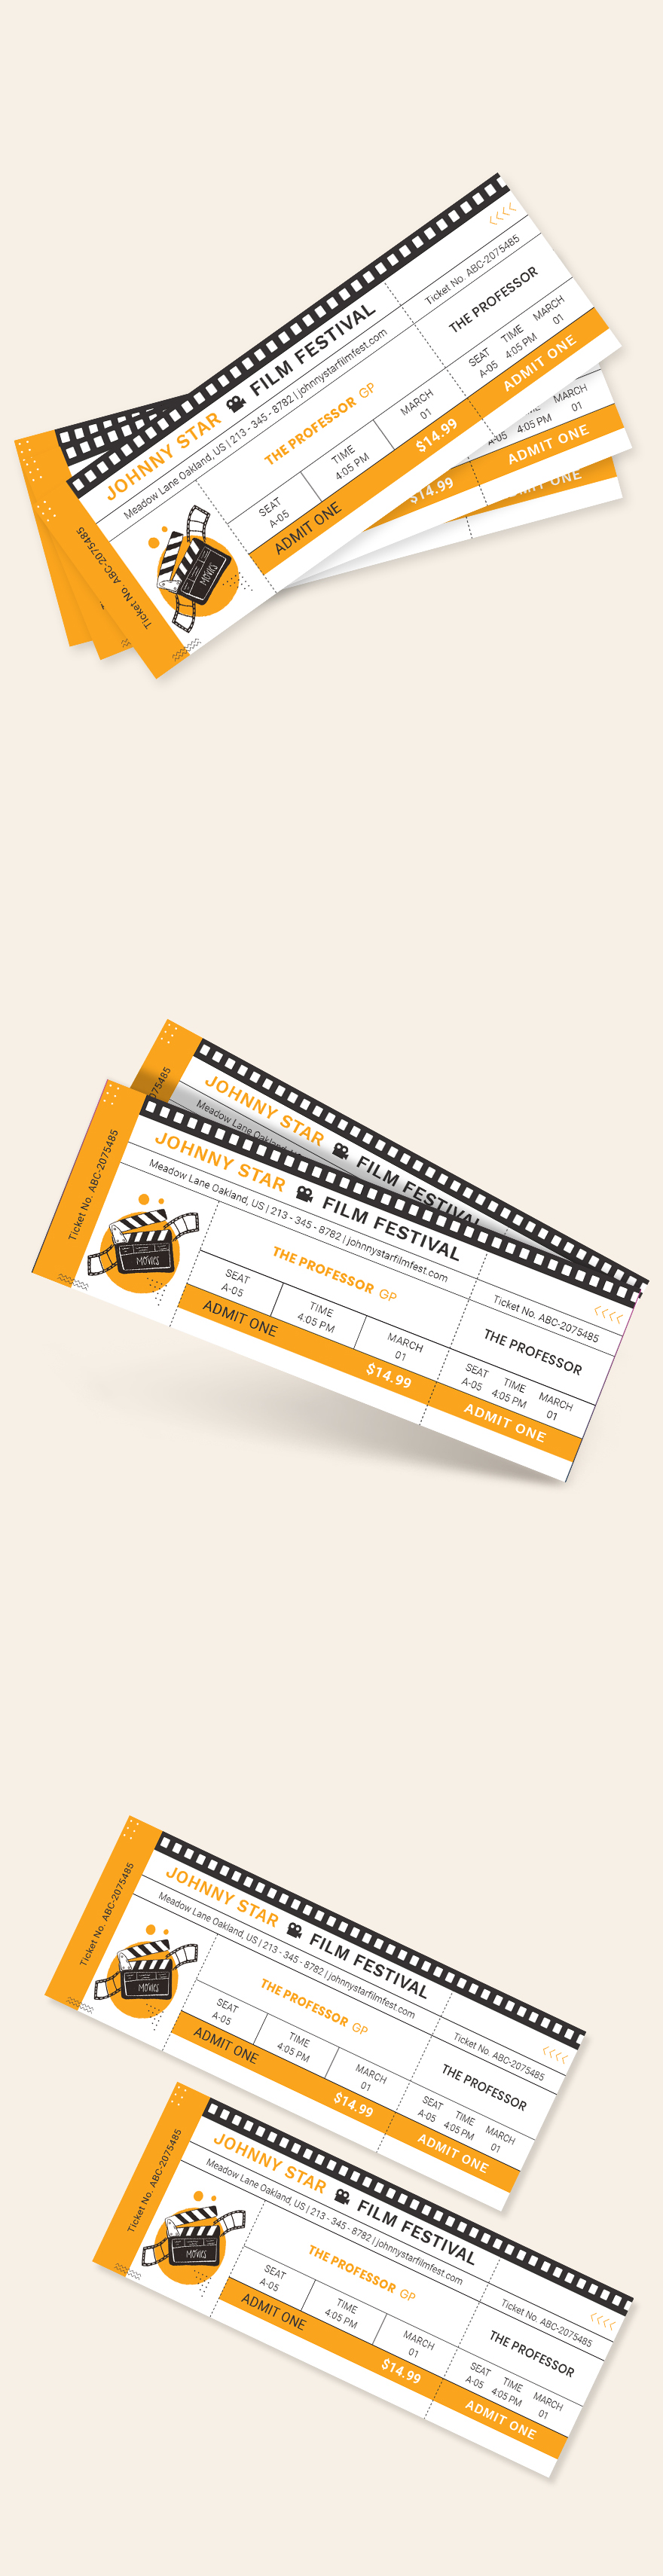 movie-ticket-templates-design-free-download-template